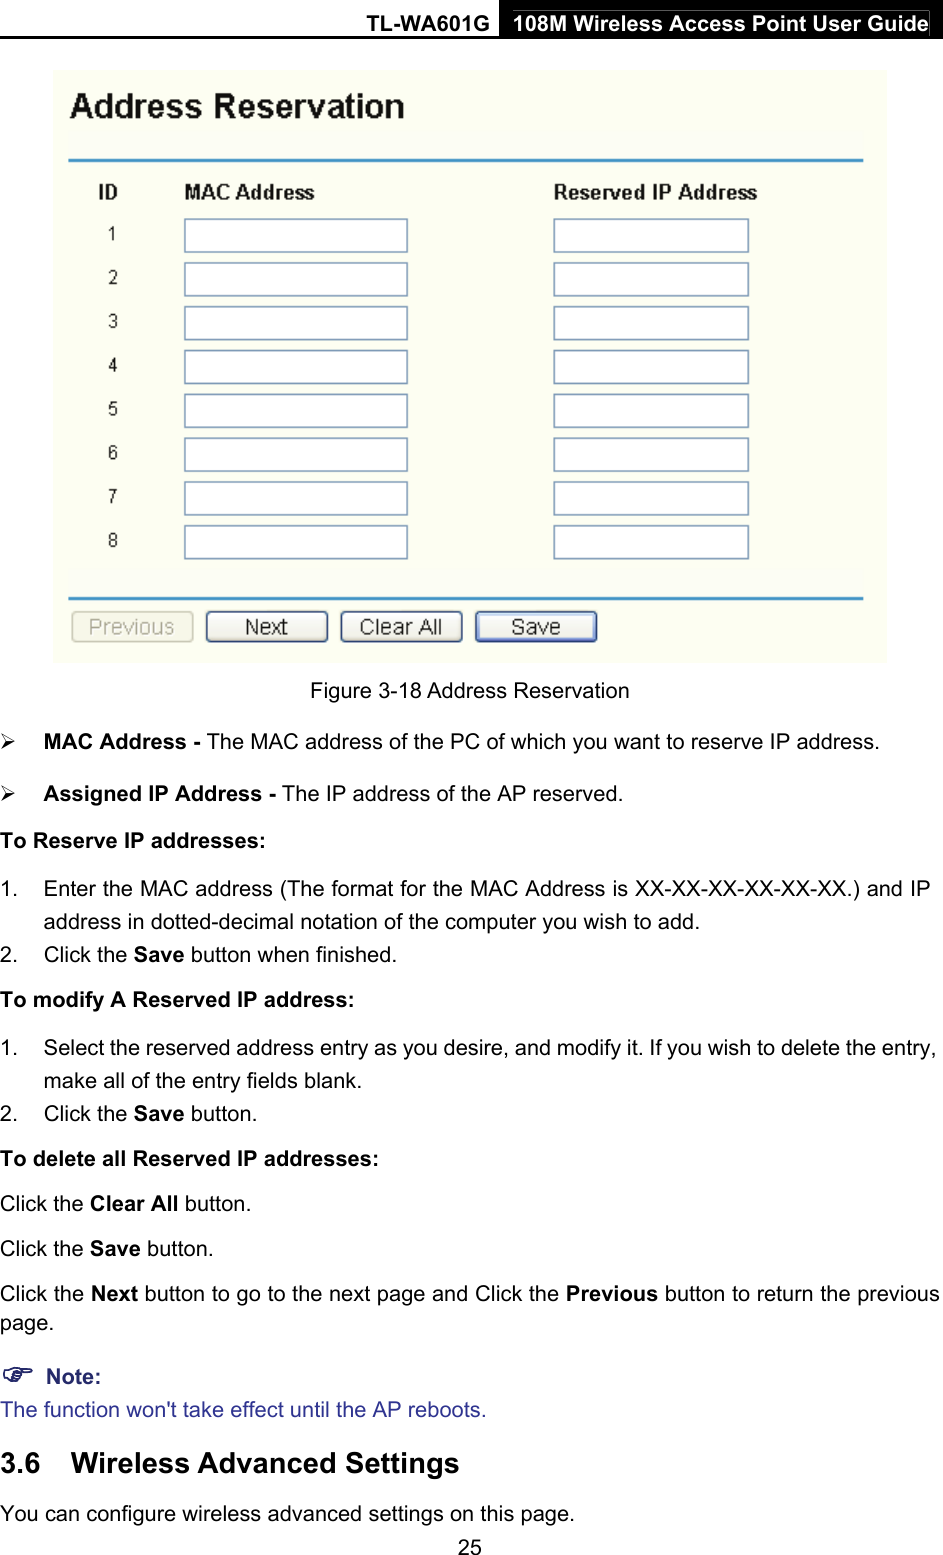 TL-WA601G 108M Wireless Access Point User Guide  25 Figure 3-18 Address Reservation ¾ MAC Address - The MAC address of the PC of which you want to reserve IP address. ¾ Assigned IP Address - The IP address of the AP reserved. To Reserve IP addresses: 1.  Enter the MAC address (The format for the MAC Address is XX-XX-XX-XX-XX-XX.) and IP address in dotted-decimal notation of the computer you wish to add. 2. Click the Save button when finished. To modify A Reserved IP address: 1.  Select the reserved address entry as you desire, and modify it. If you wish to delete the entry, make all of the entry fields blank. 2. Click the Save button. To delete all Reserved IP addresses: Click the Clear All button. Click the Save button. Click the Next button to go to the next page and Click the Previous button to return the previous page. ) Note: The function won&apos;t take effect until the AP reboots. 3.6  Wireless Advanced Settings You can configure wireless advanced settings on this page. 